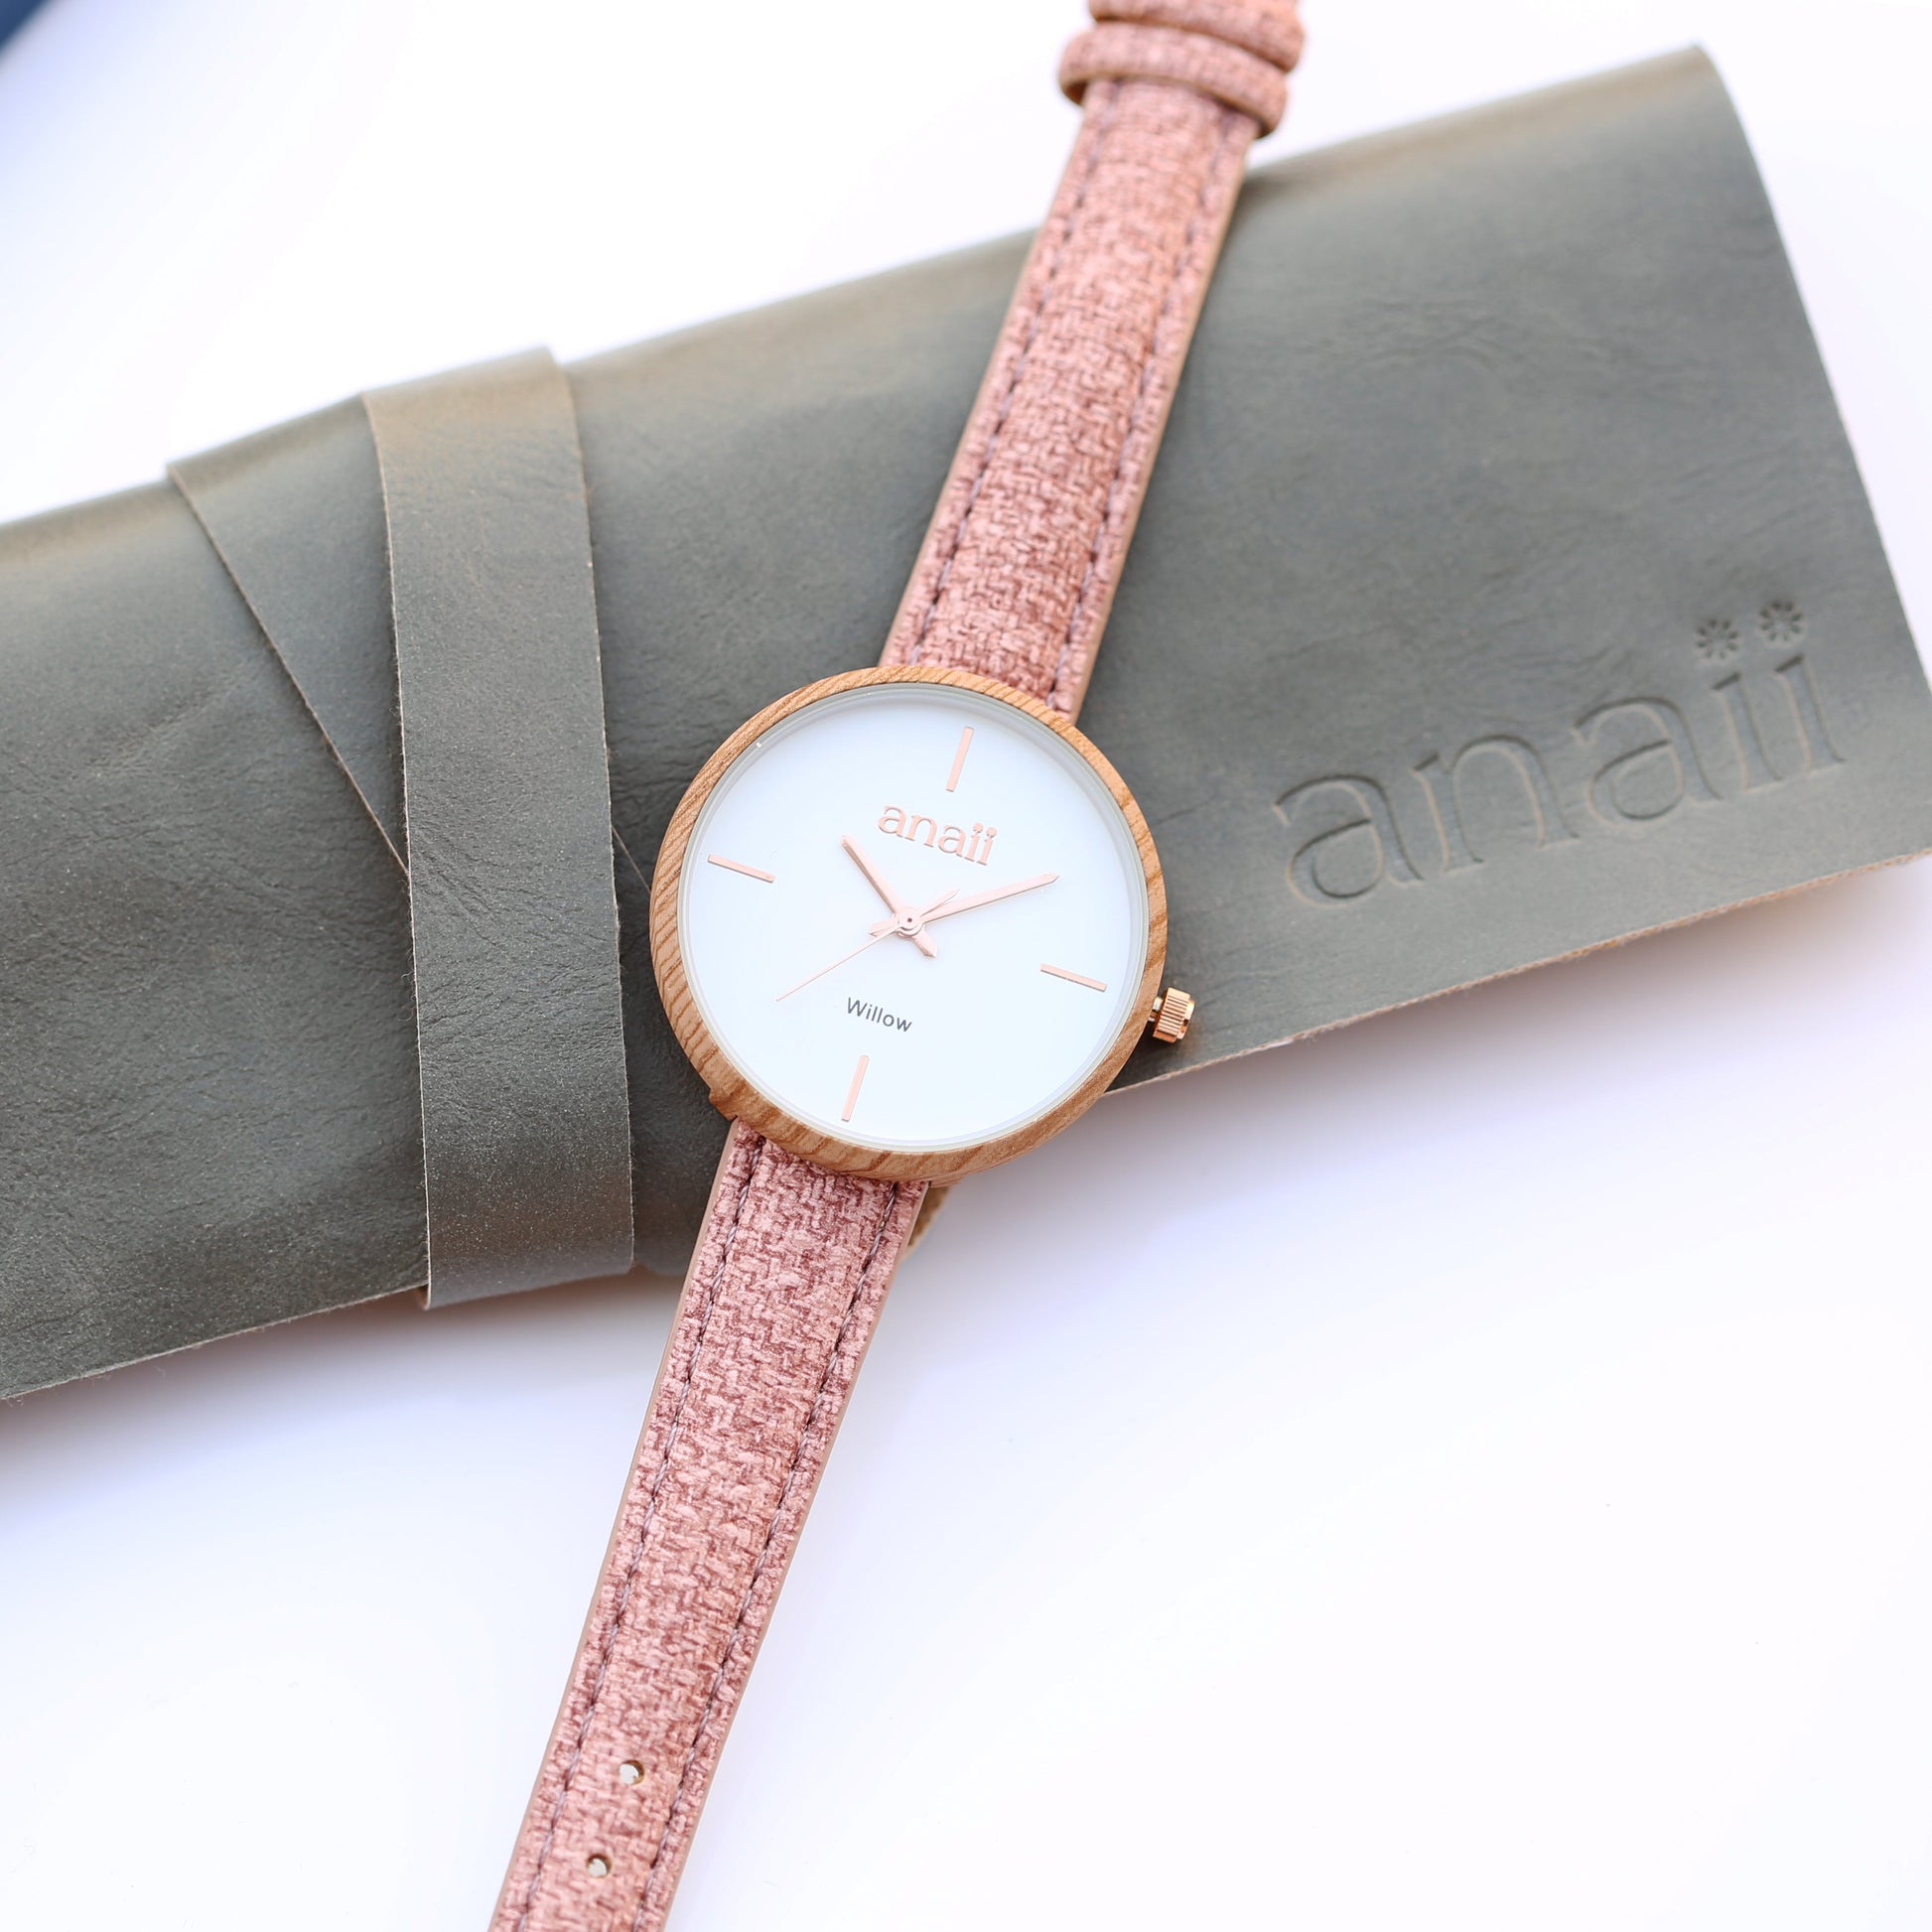 Personalized Ladies' Watches - Handwriting Engraved Watch in Sweet Pink 